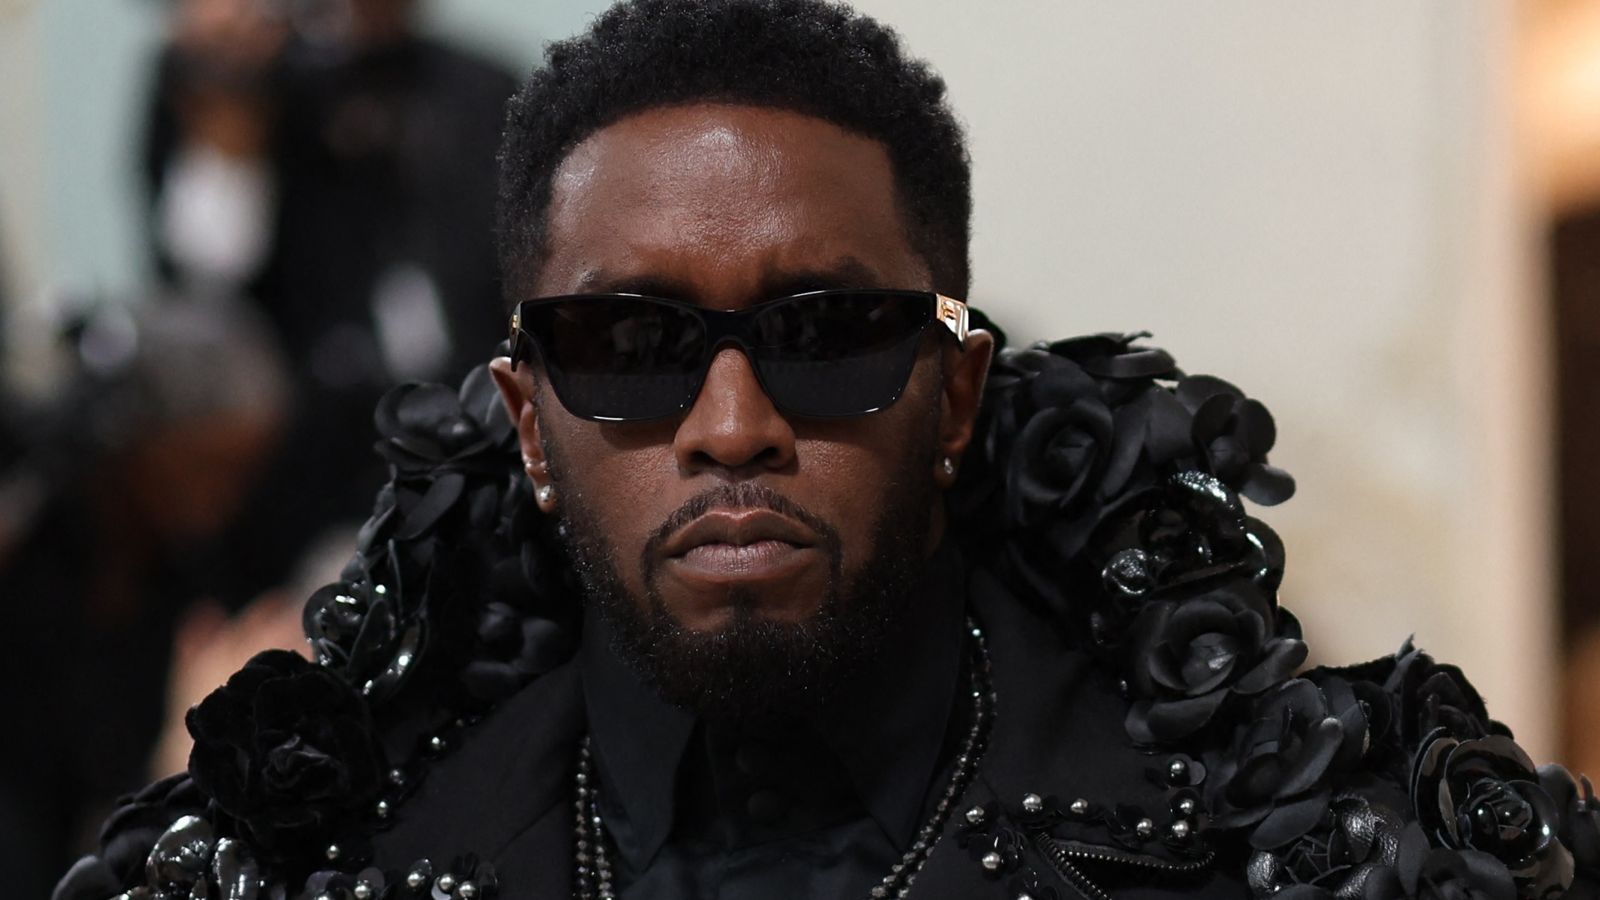 Sean ‘Diddy’ Combs: Former porn actress accuses rap mogul of sex assault and trafficking